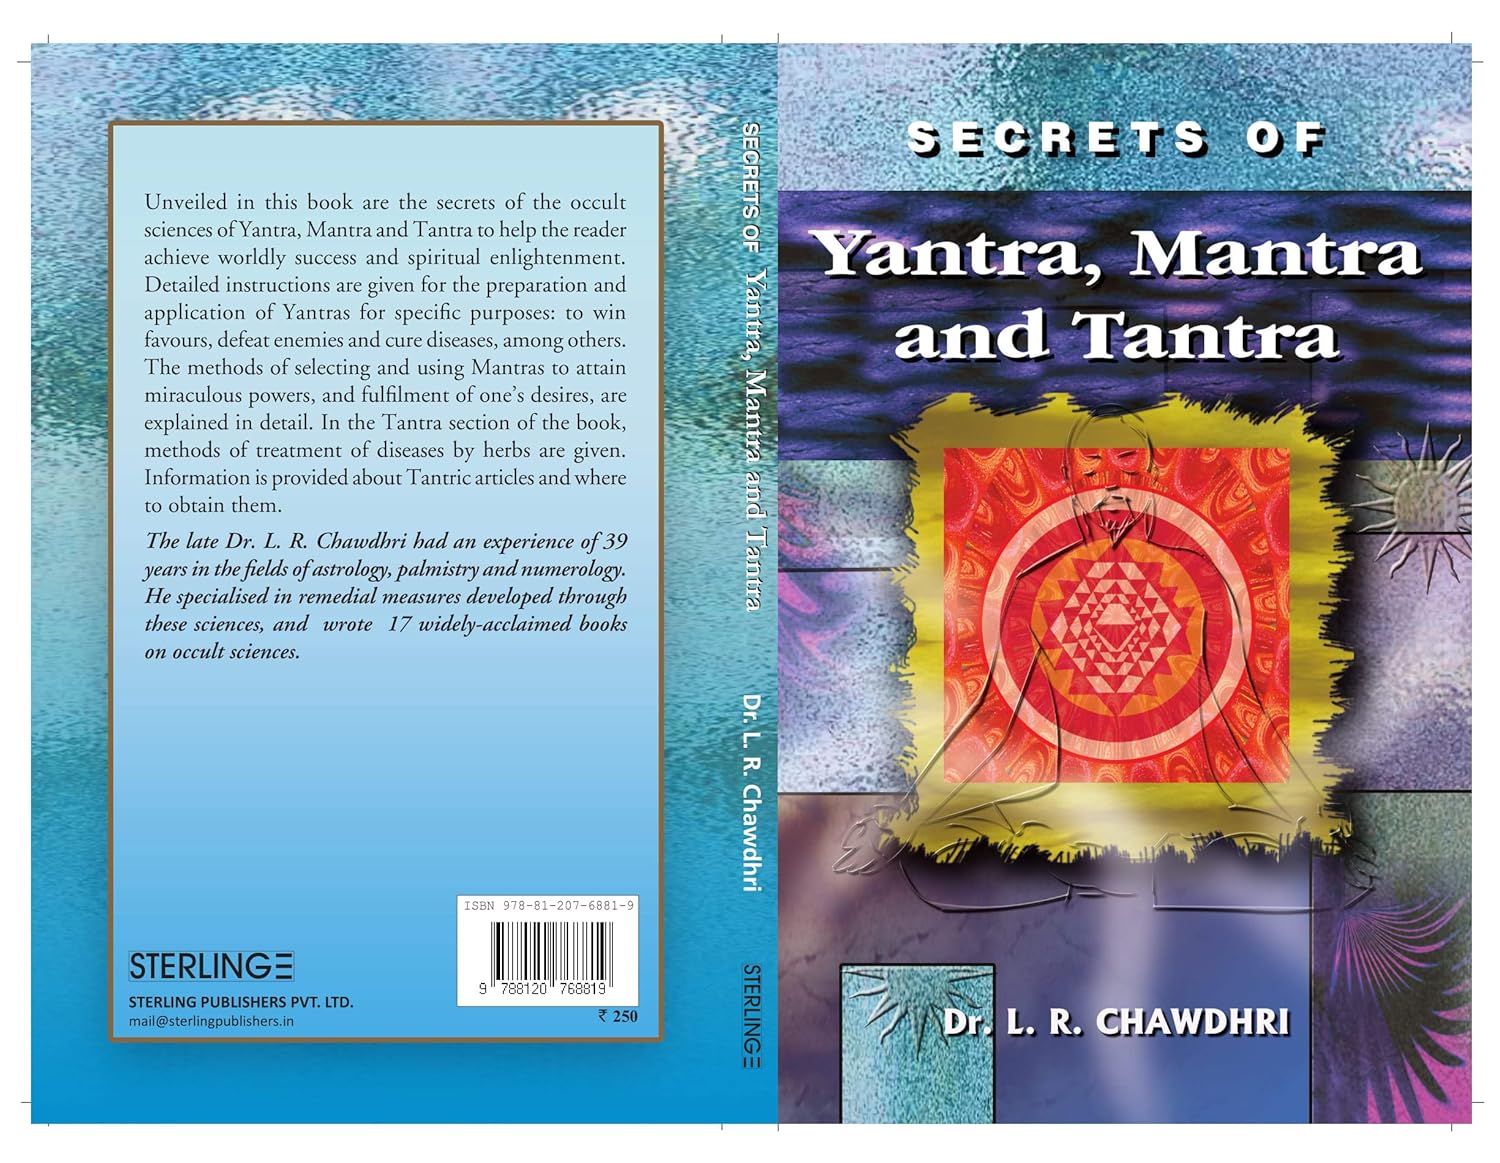 SECRETS OF YANTRA MANTRA AND TANTRA